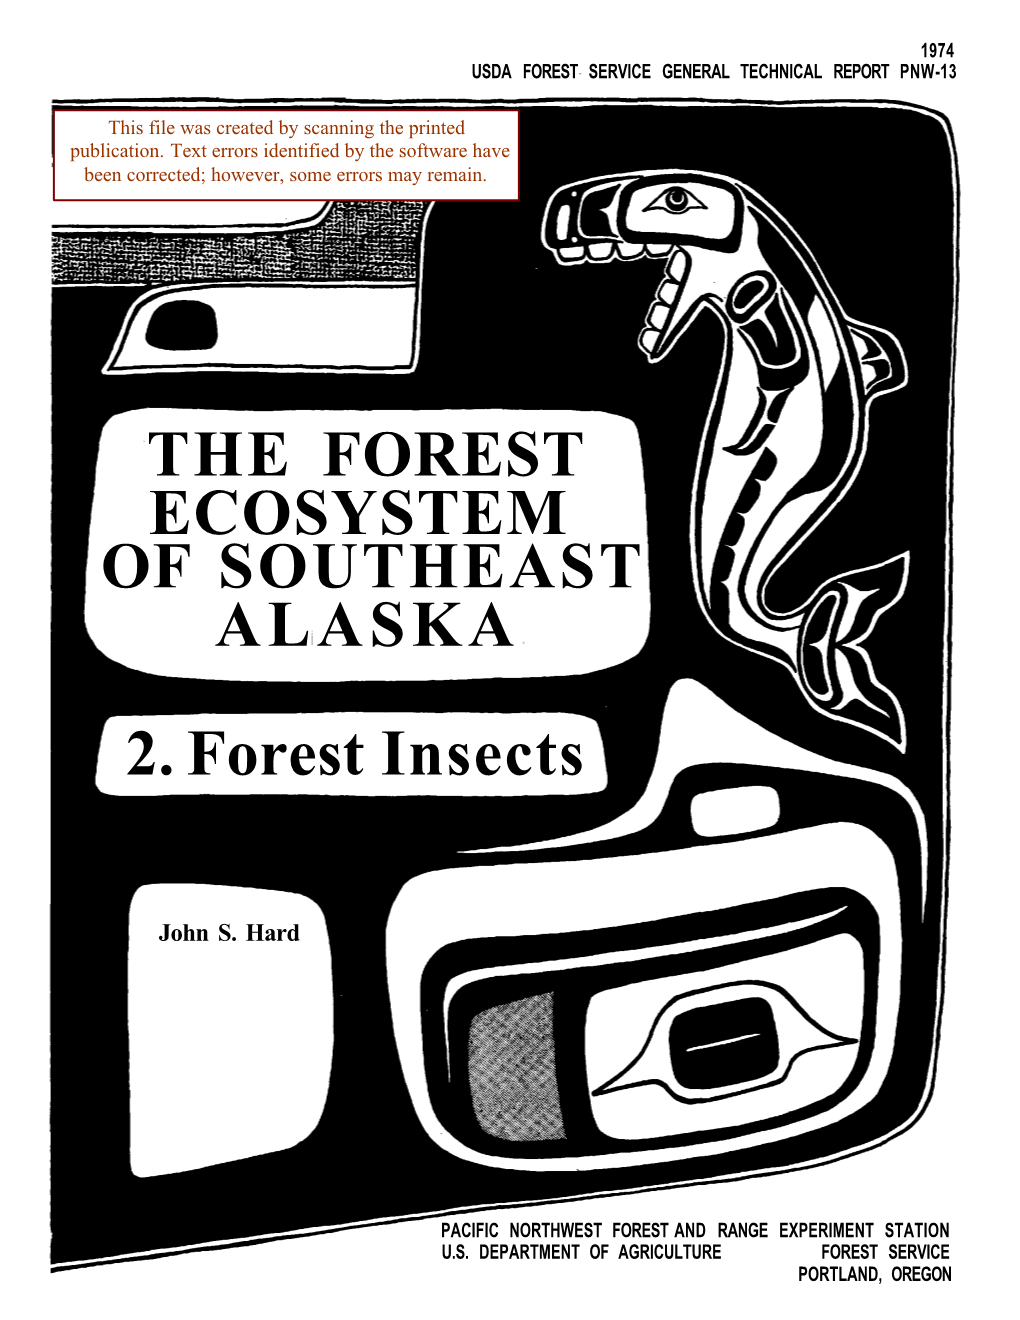 THE FOREST ECOSYSTEM of SOUTHEAST ALASKA 2. Forest Insects